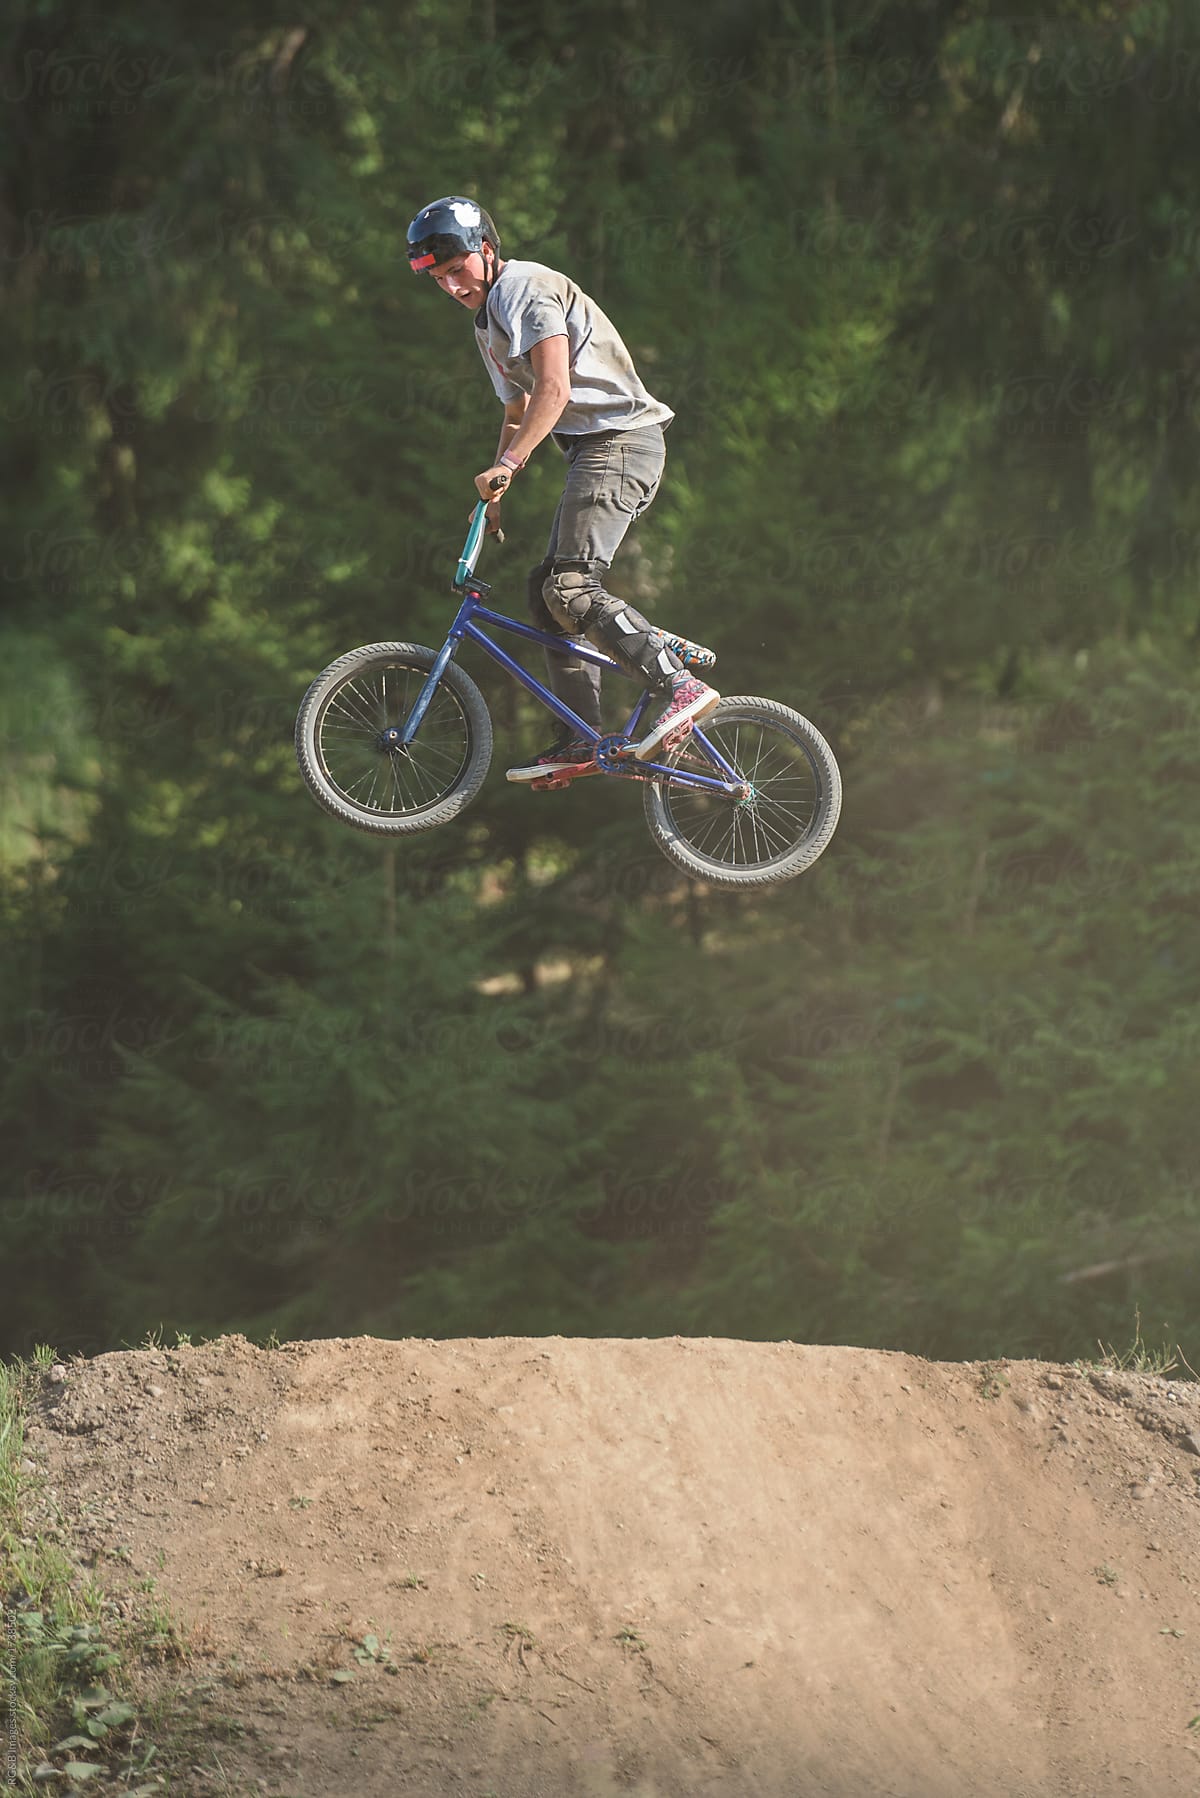 Male teenager catching air with BMX